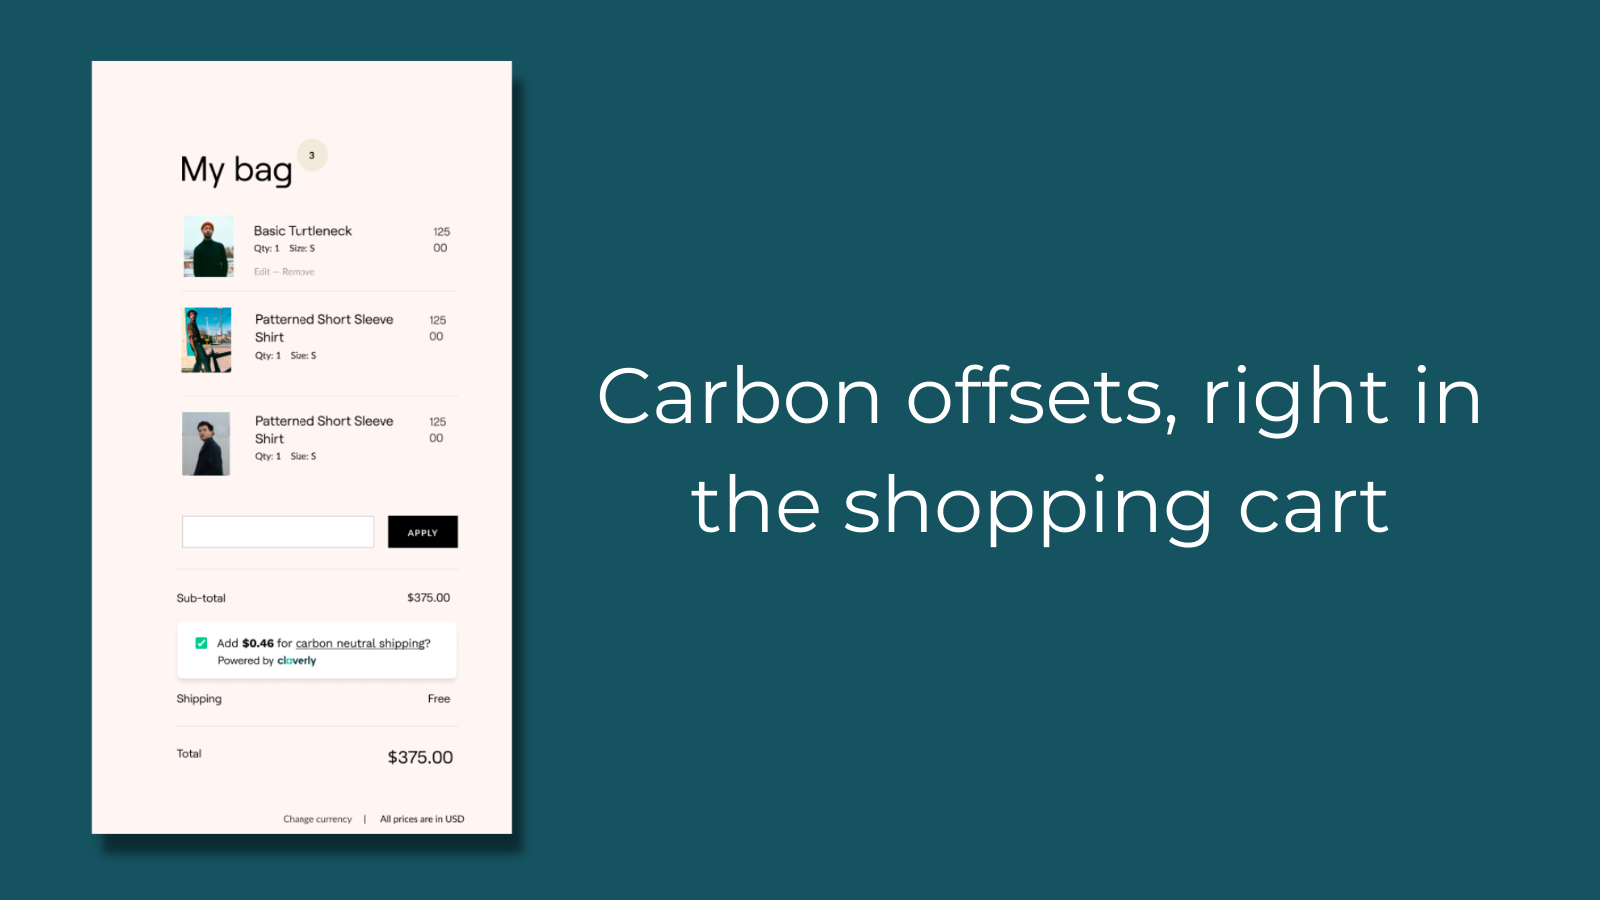 Carbon offsets right in the shopping cart